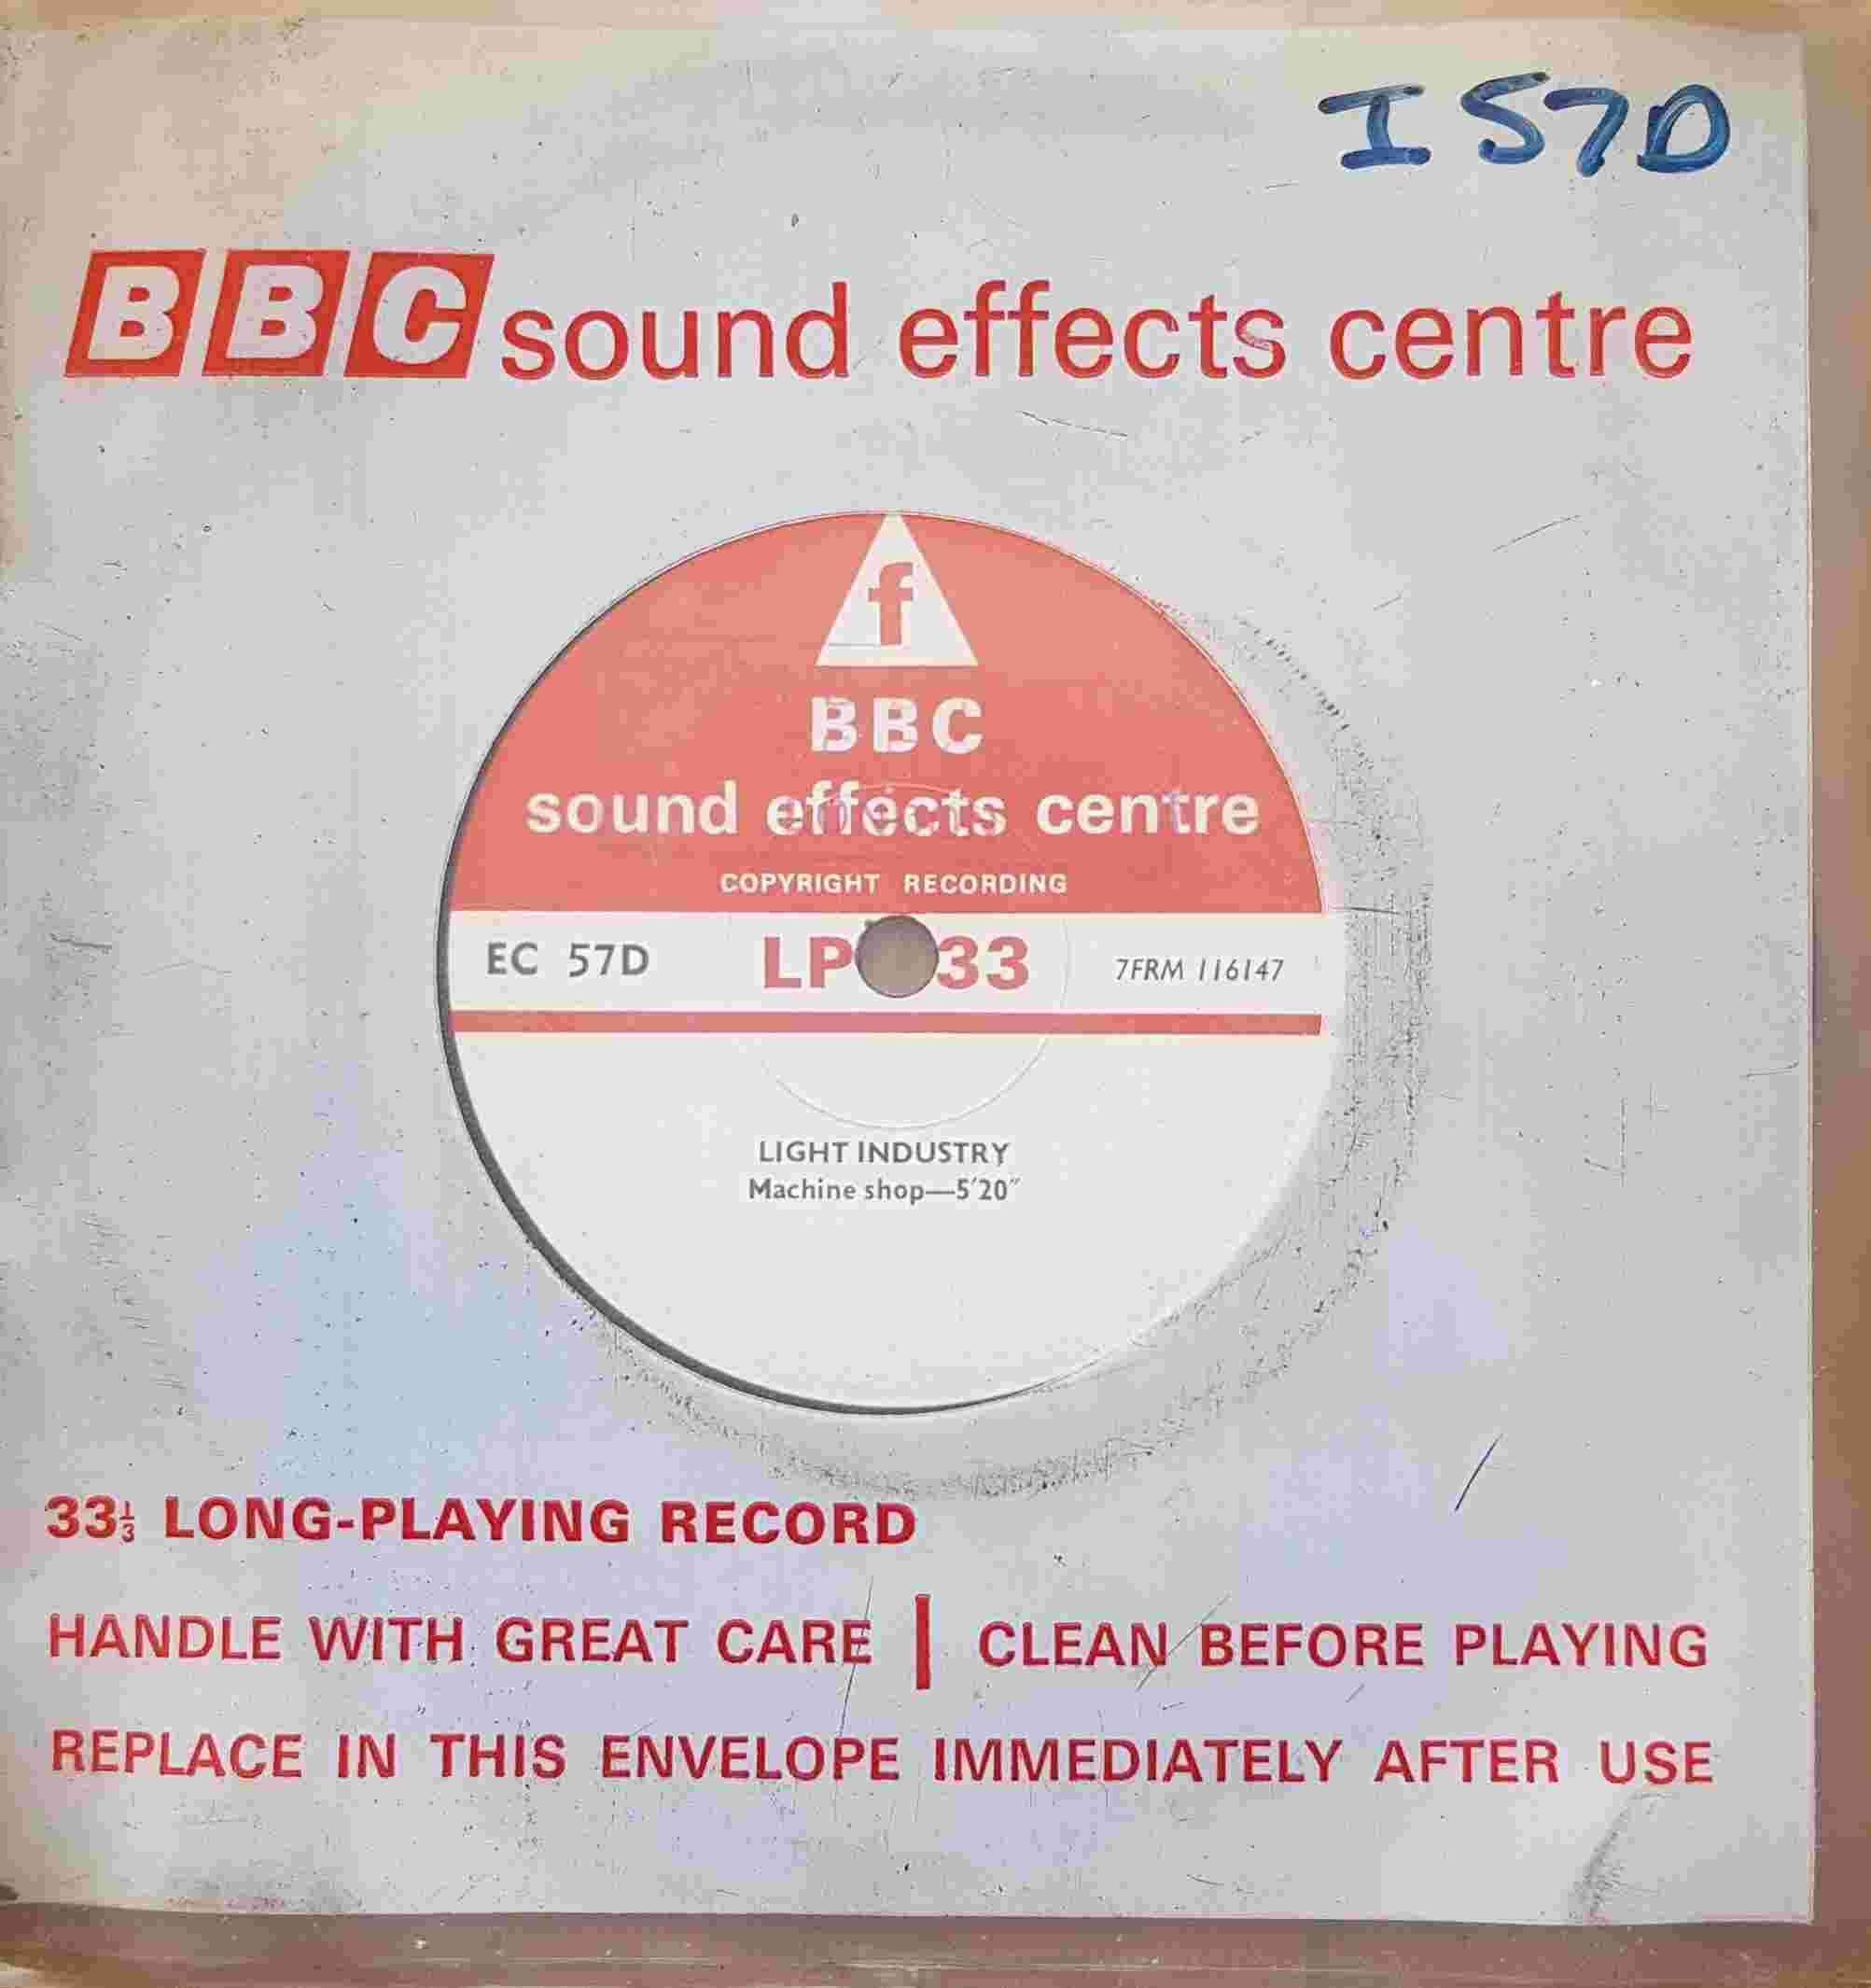 Picture of EC 57D Light industry by artist Not registered from the BBC singles - Records and Tapes library